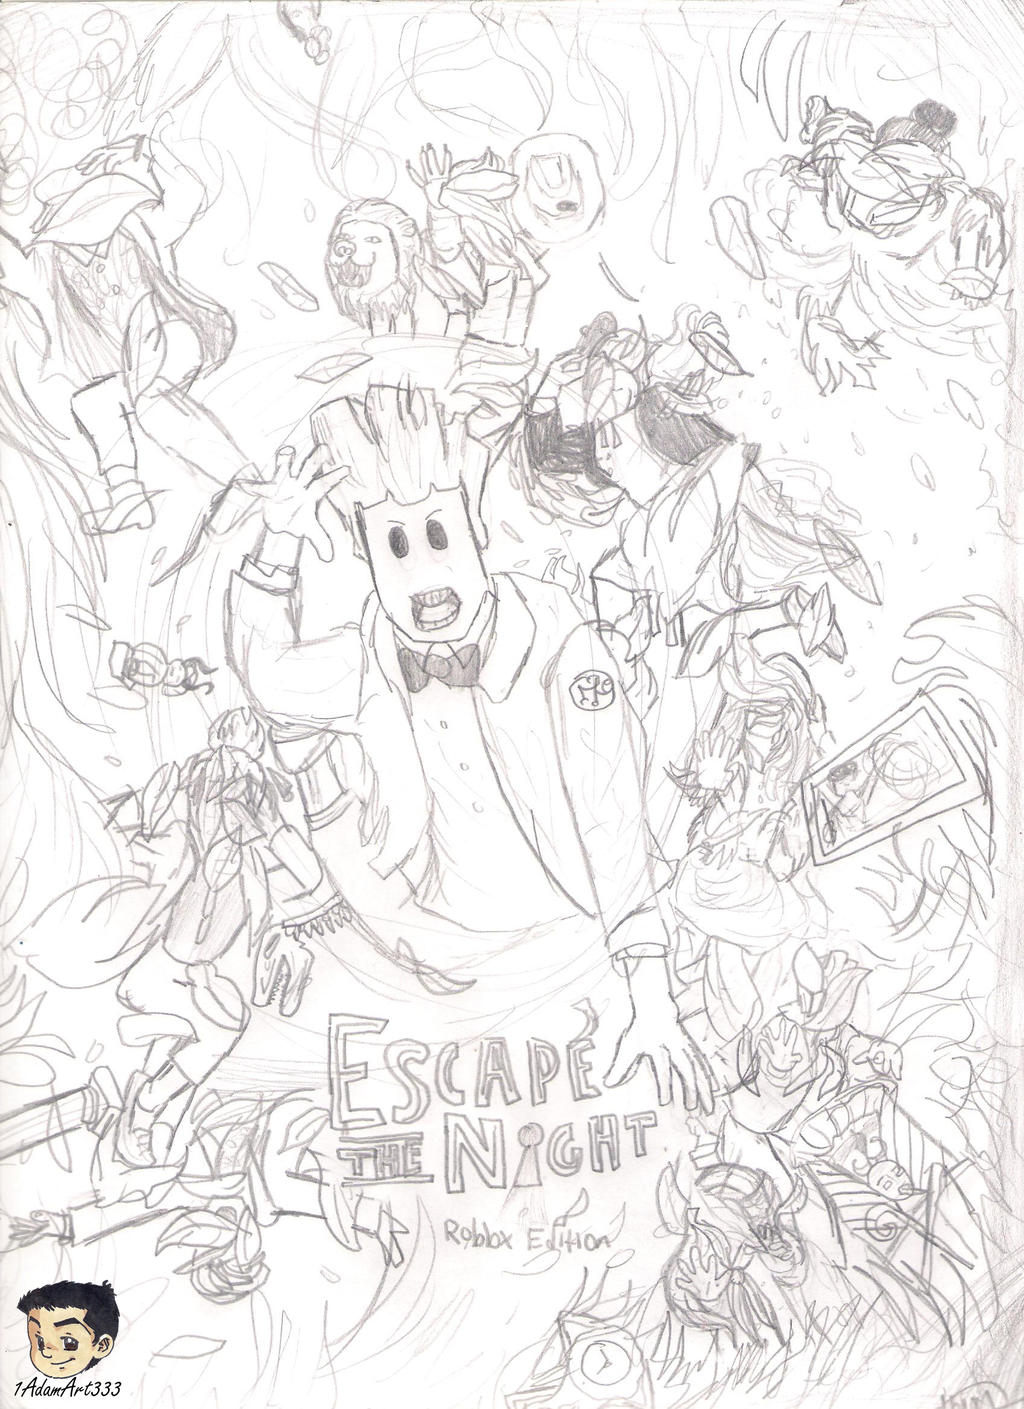 Escape The Night Roblox Edition By 1adamart333 On Deviantart - escape the night season 3 roblox